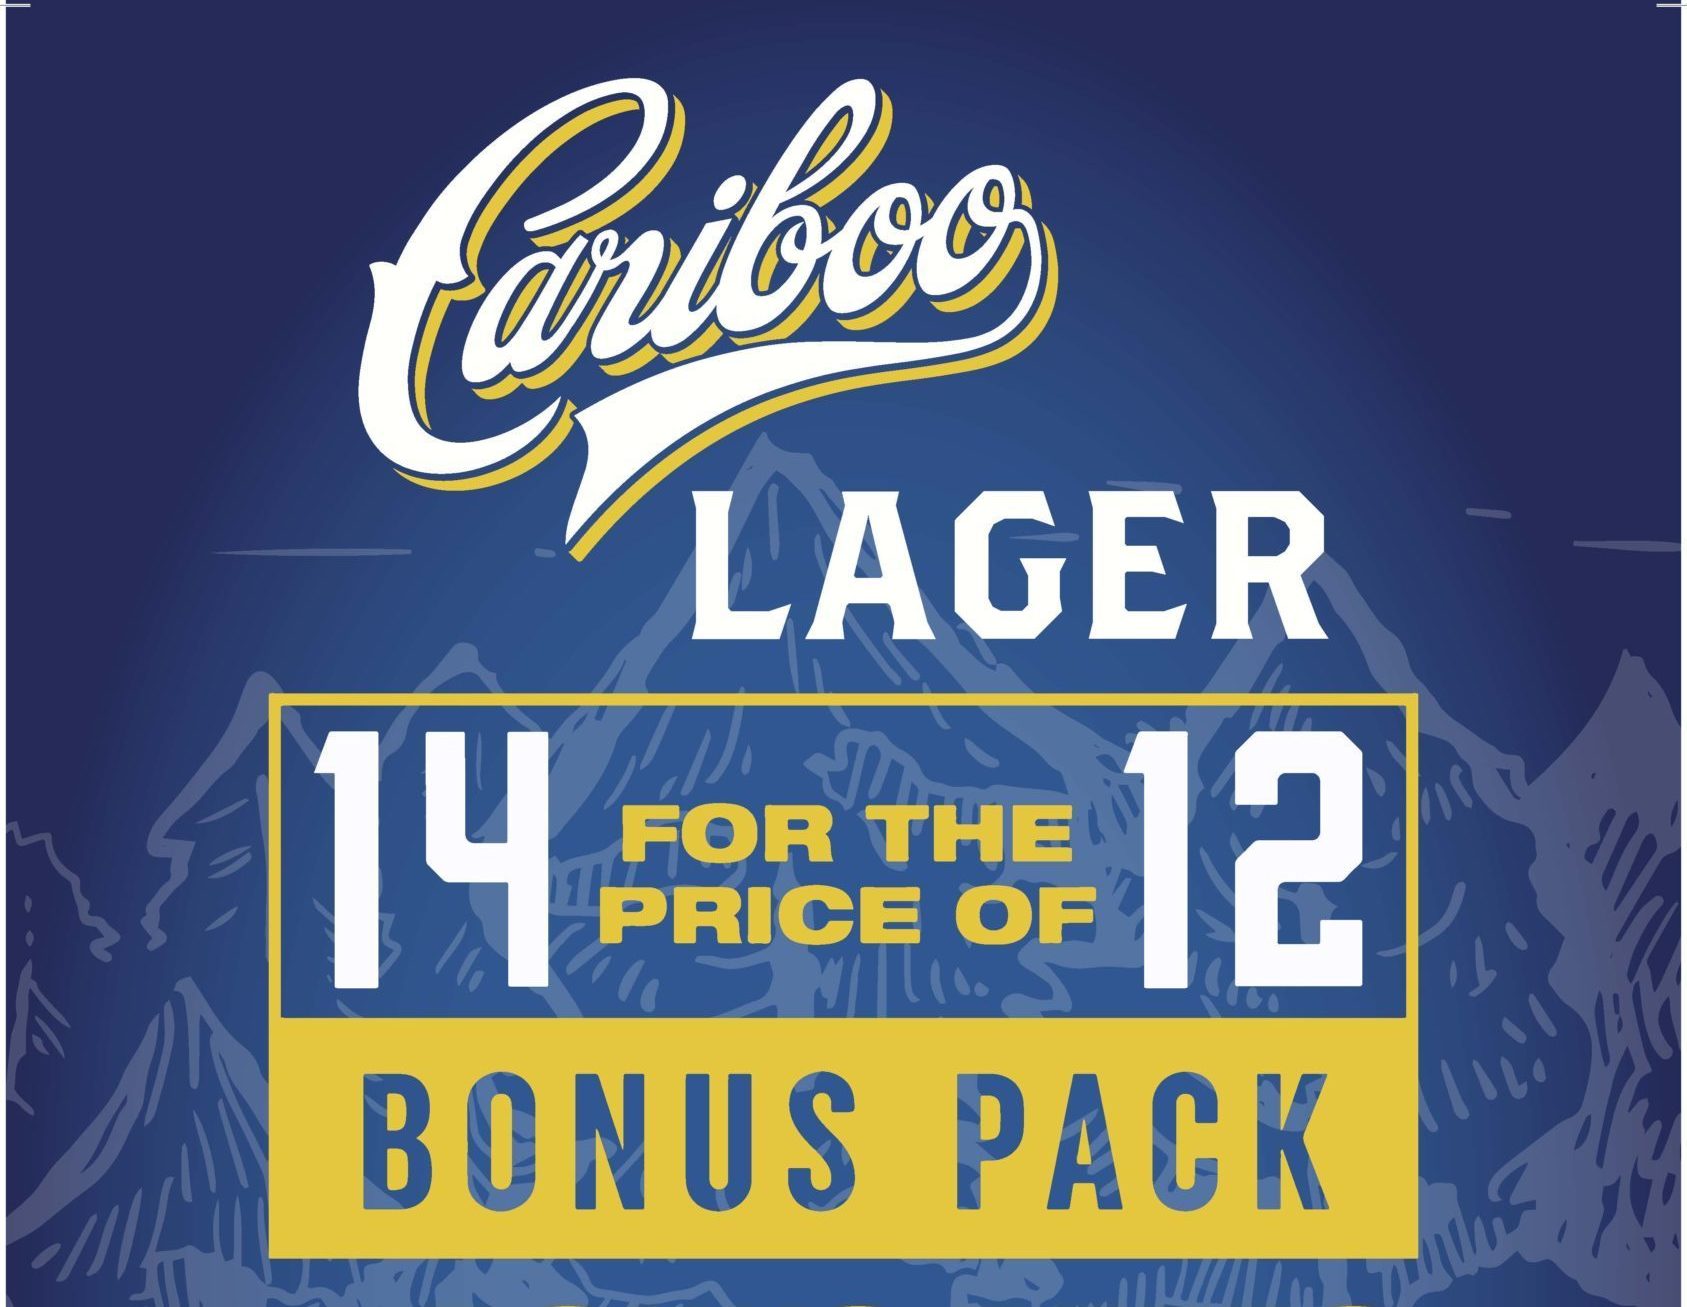 Cariboo Lager “14 for the price of 12” Limited Edition BONUS packs available in BC!